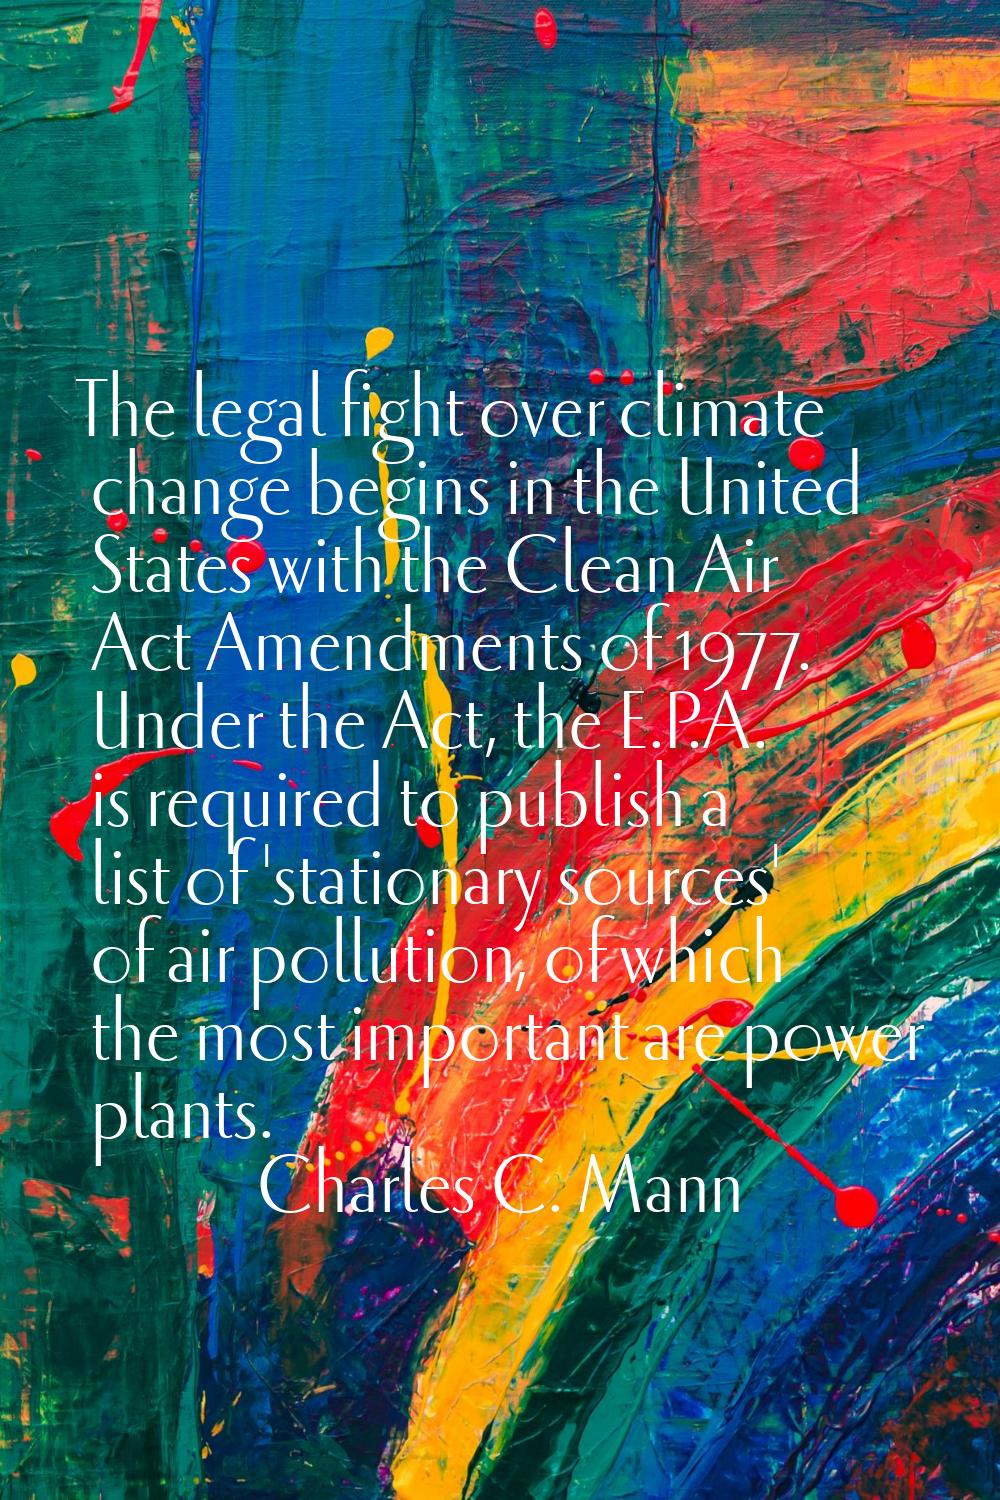 The legal fight over climate change begins in the United States with the Clean Air Act Amendments o